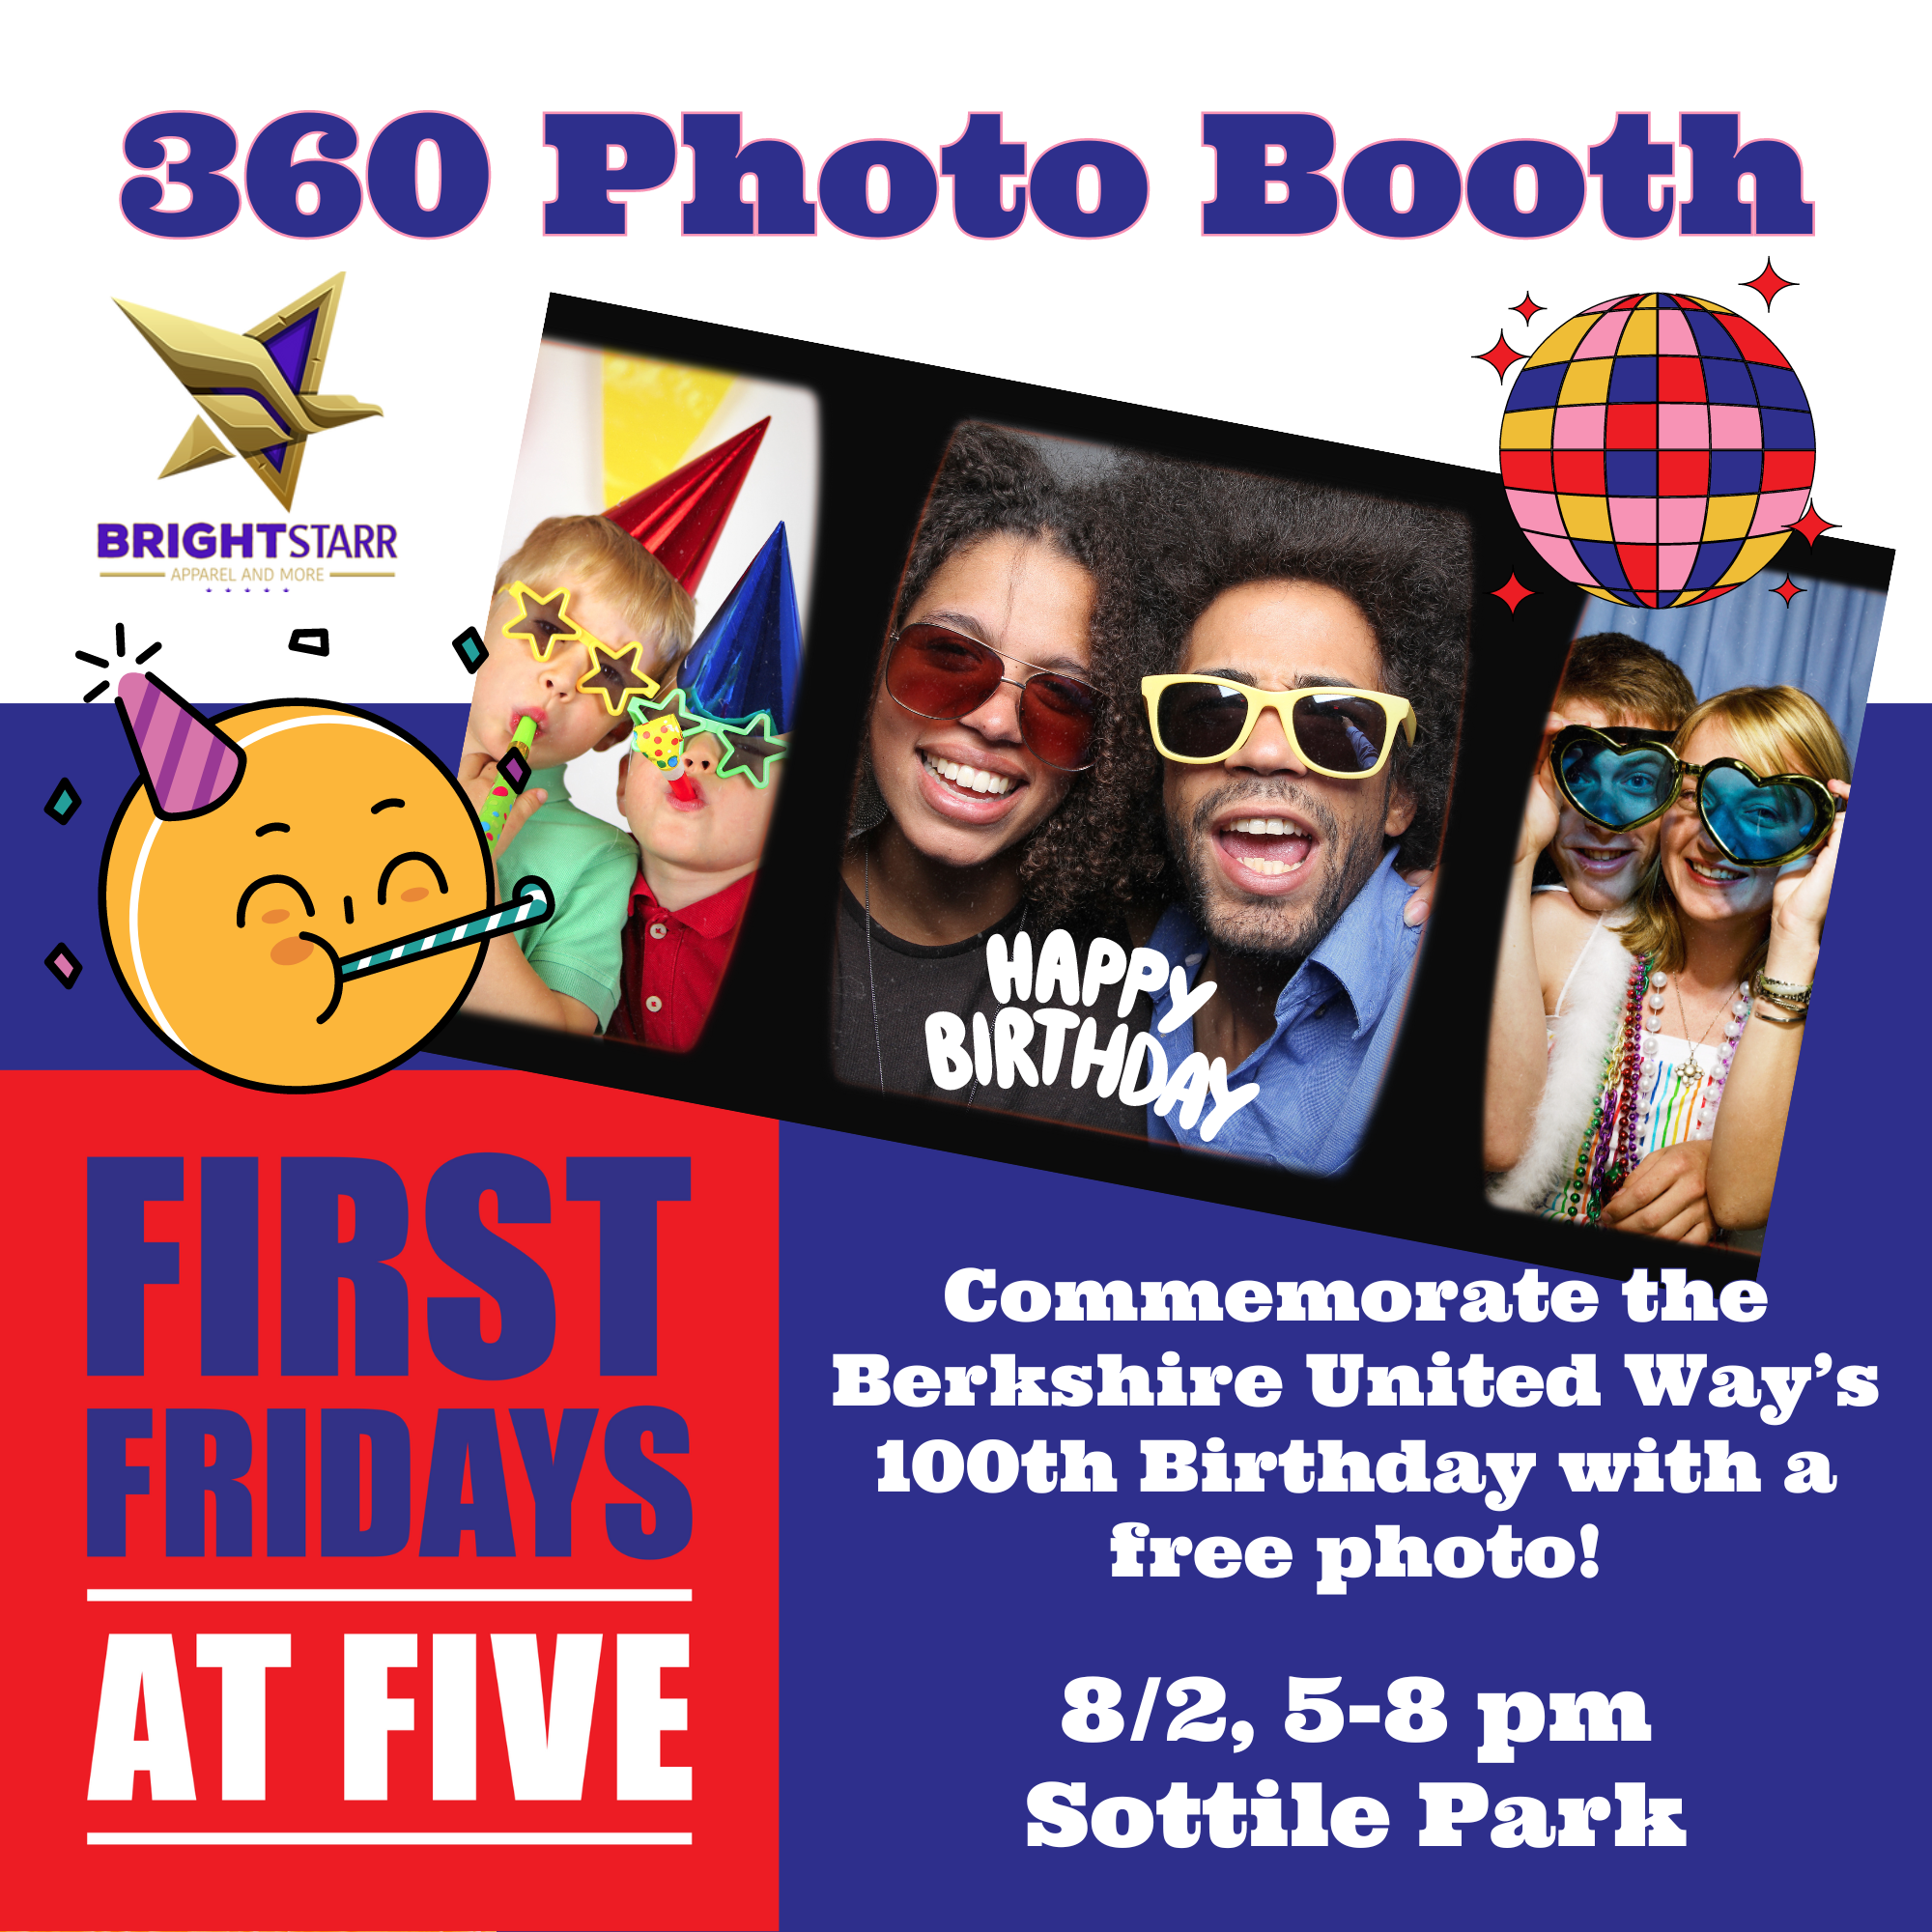 Bright Starr 360 Photo Booth